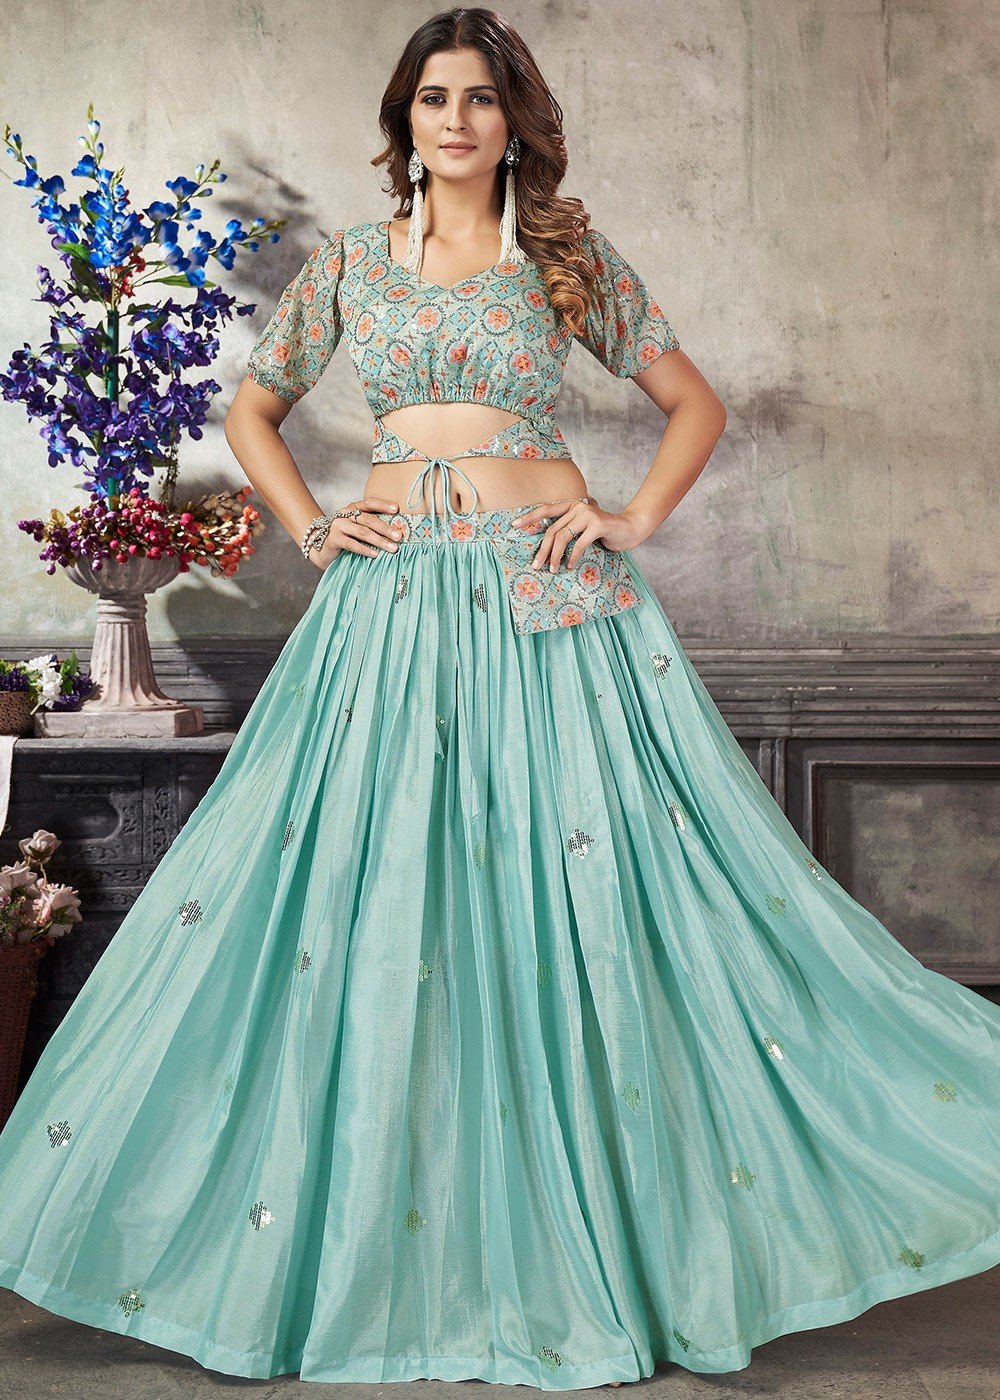 Buy Latest Indo Western Lehengas Online for Women in the USA